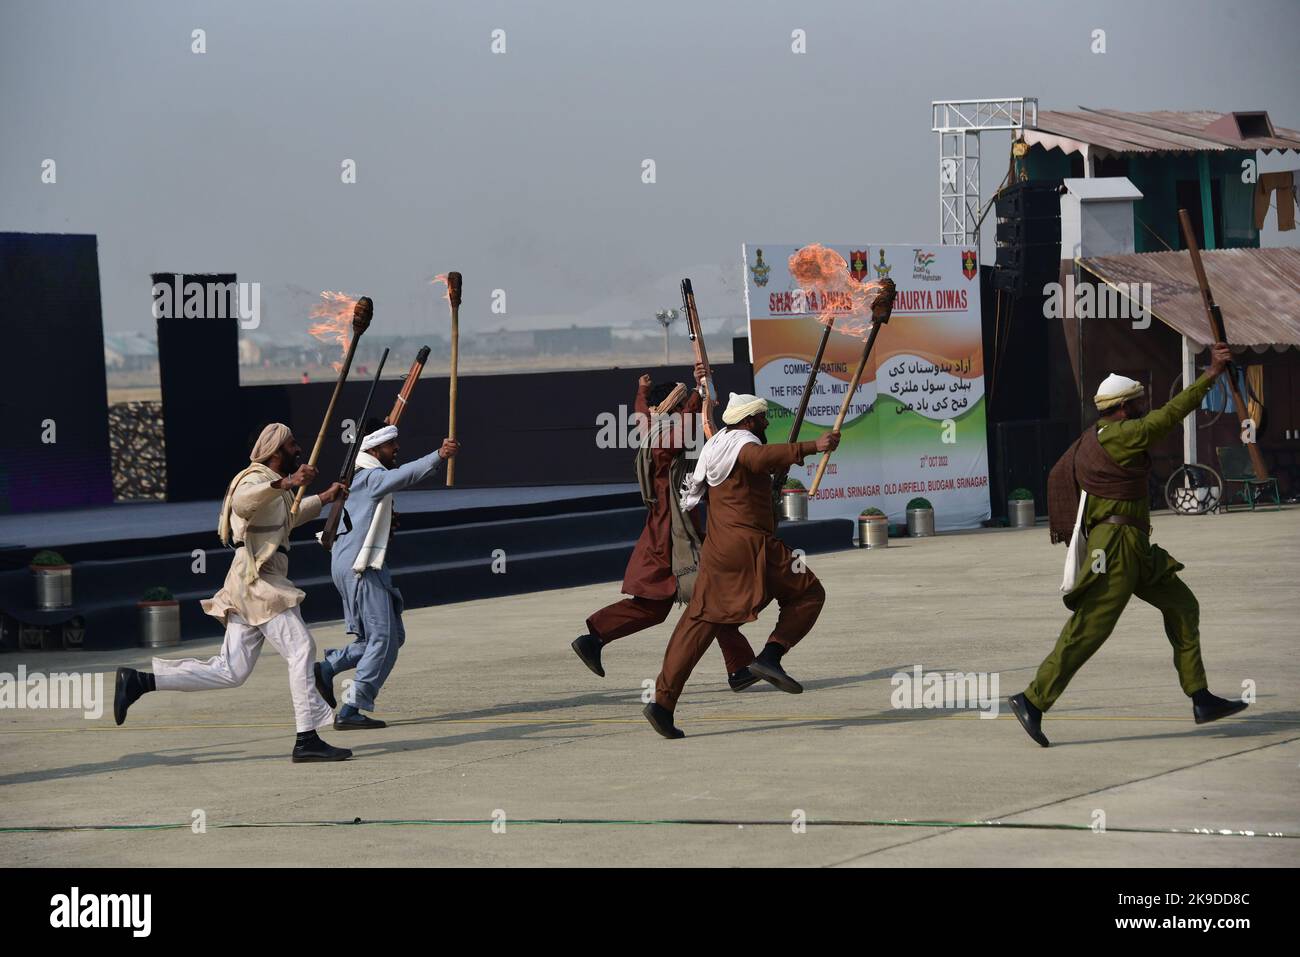 SRINAGAR, INDIA - OCTOBER 27: Artists perform the re-enactment of the Indian Army's Srinagar landing in 1947 at the Air Force Station on October 27, 2022 in Srinagar, India. The Indian Army celebrates October 27 every year as the 'Infantry Day', as it was on this day that the 1st Battalion of the Sikh Regiment landed at Srinagar airbase and displayed resoluteness and extraordinary courage to thwart the evil designs of the Pakistan Army, who had invaded Kashmir with the help of tribal raiders in 1947. (Photo by Waseem Andrabi/Hindustan Times/Sipa USA) Stock Photo